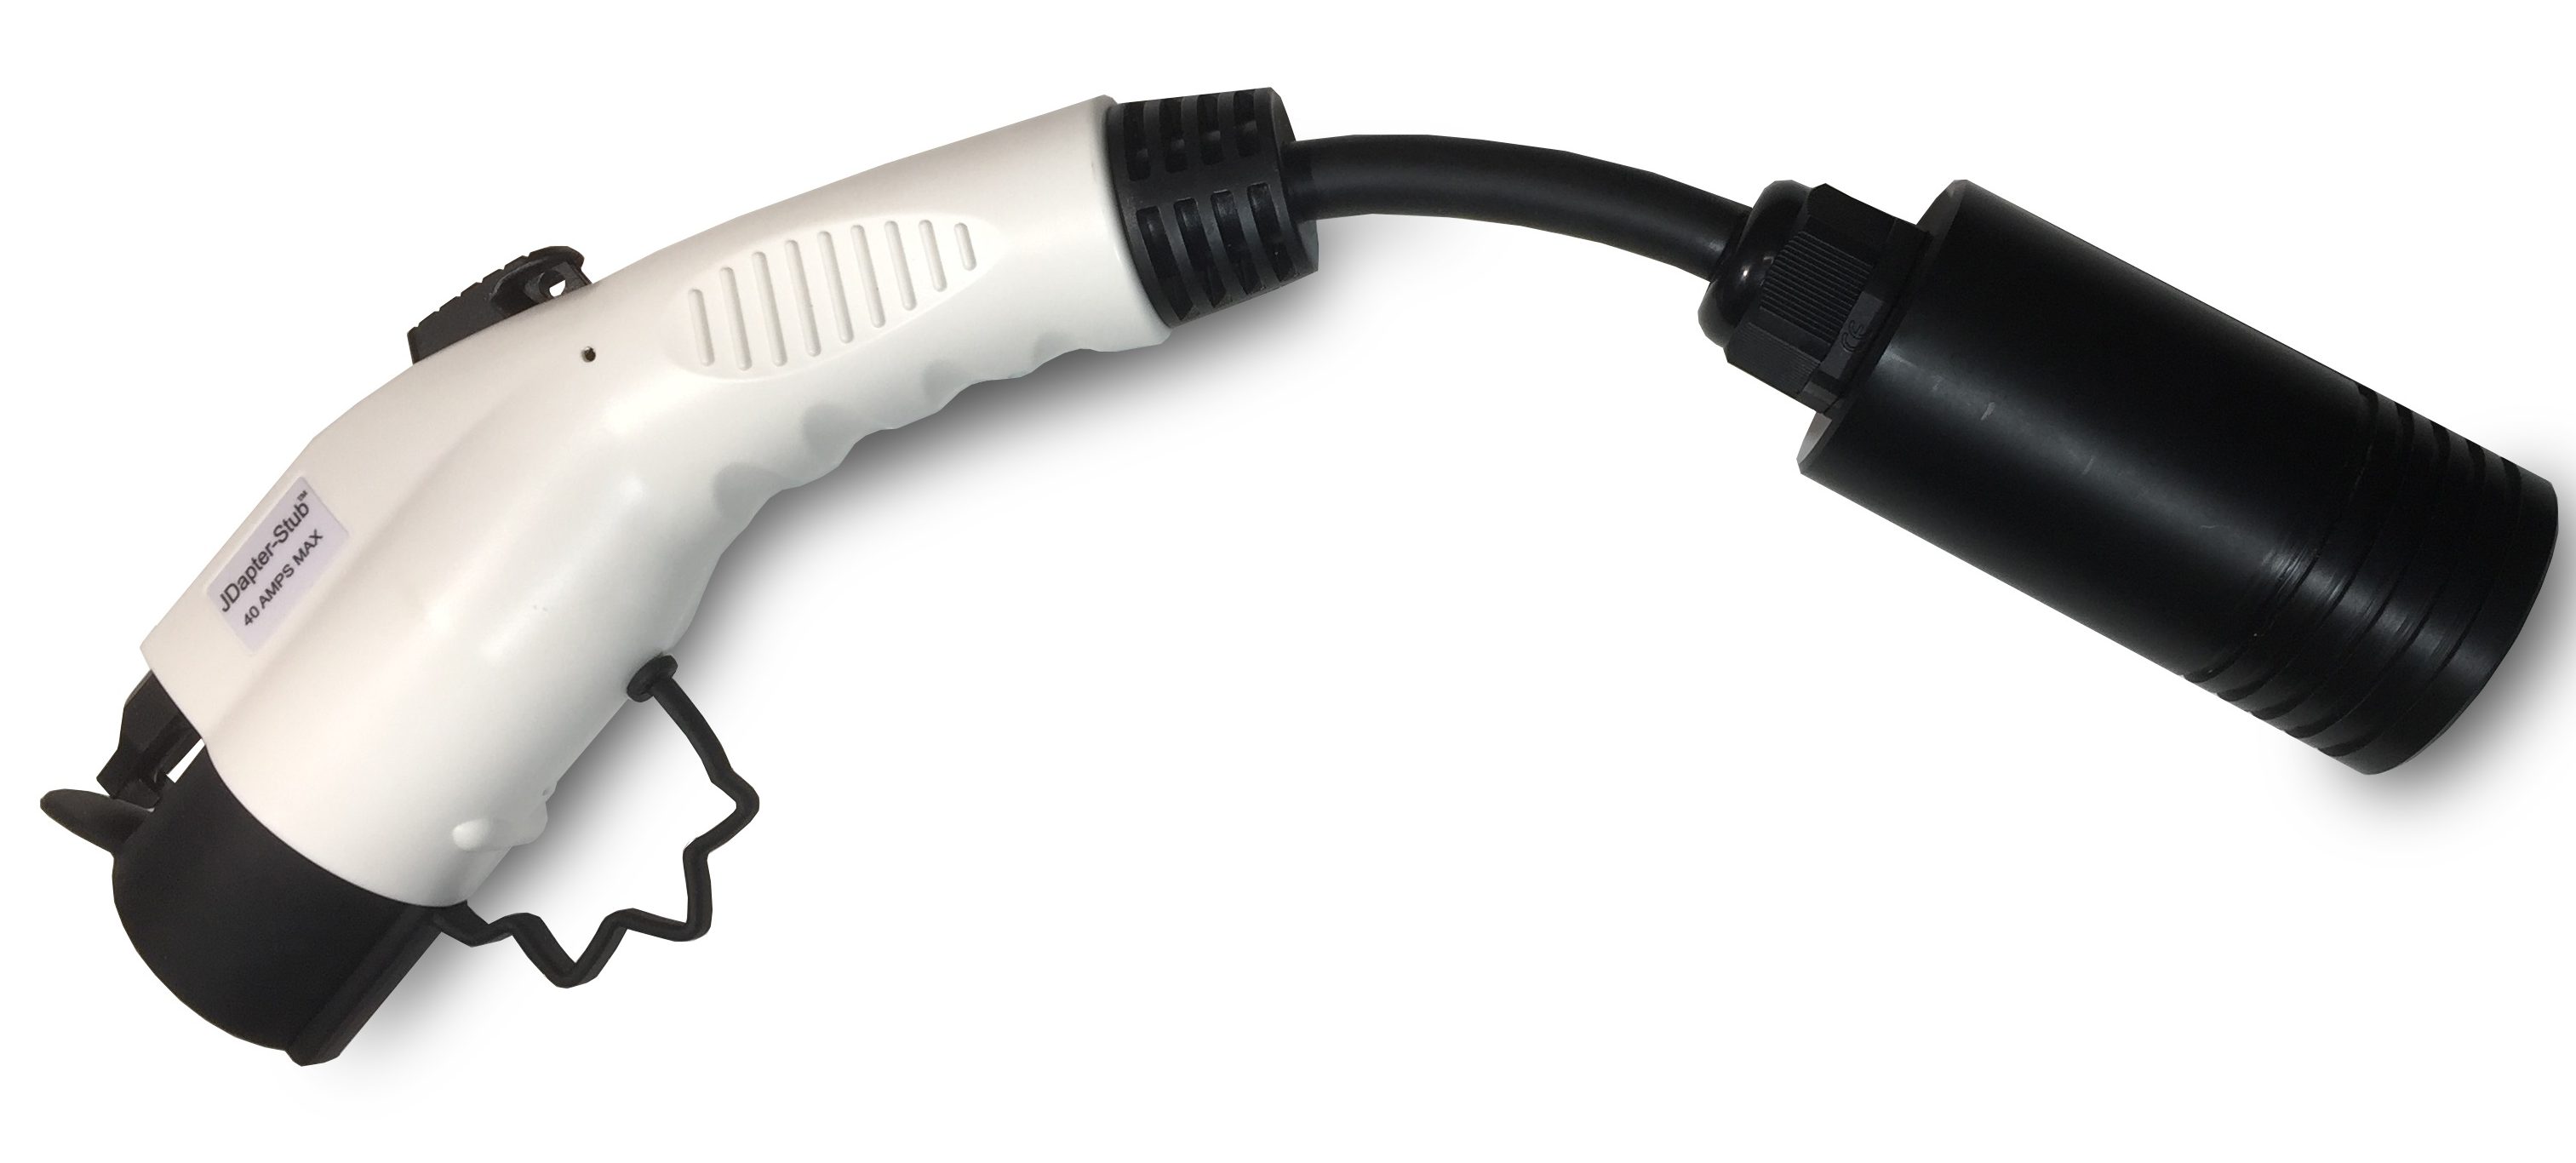 New Tesla to J1772 adapter allows other electric cars to charge at